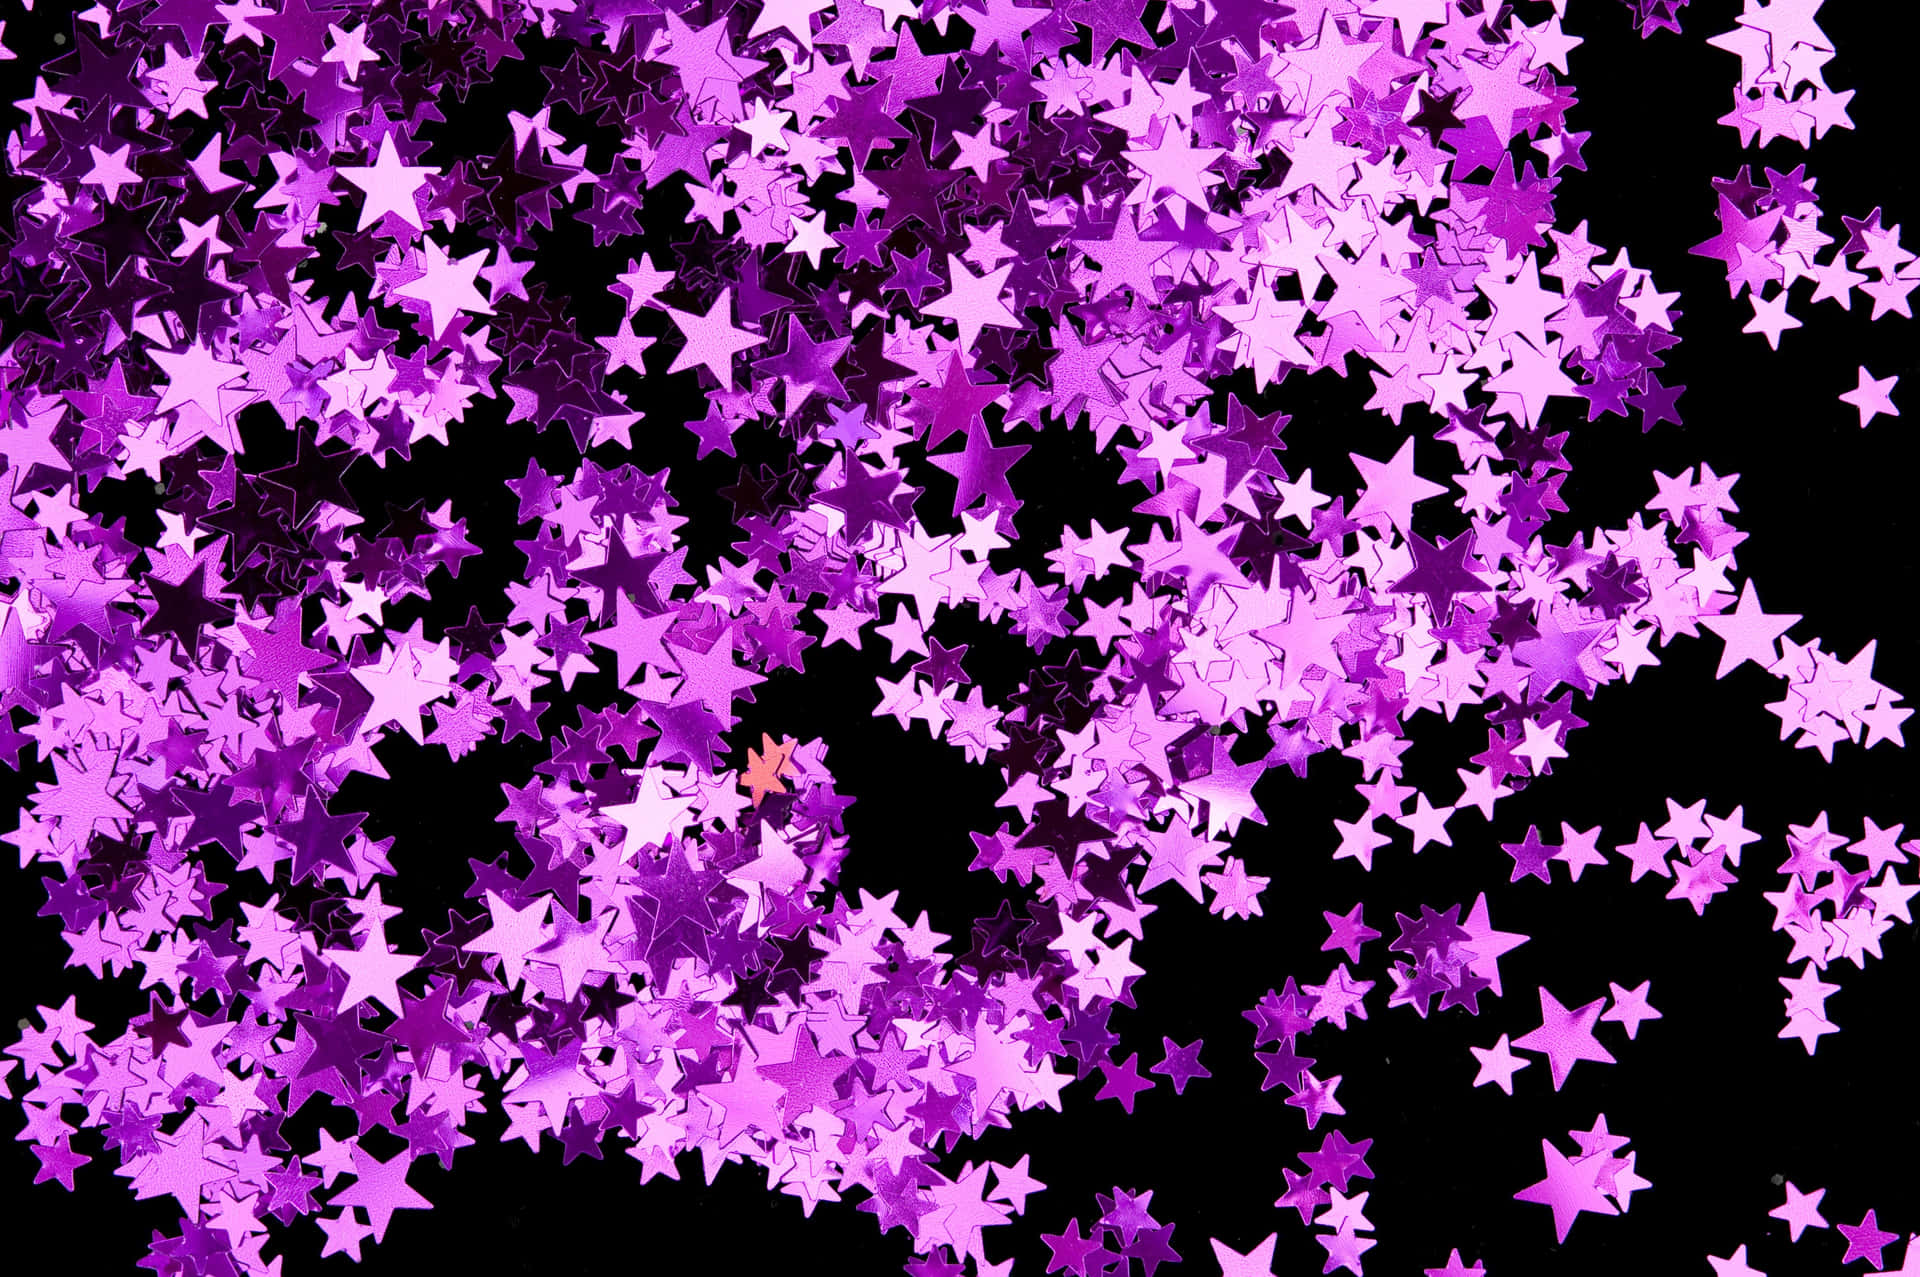 Caption: Dazzling Pink Stars In The Sky